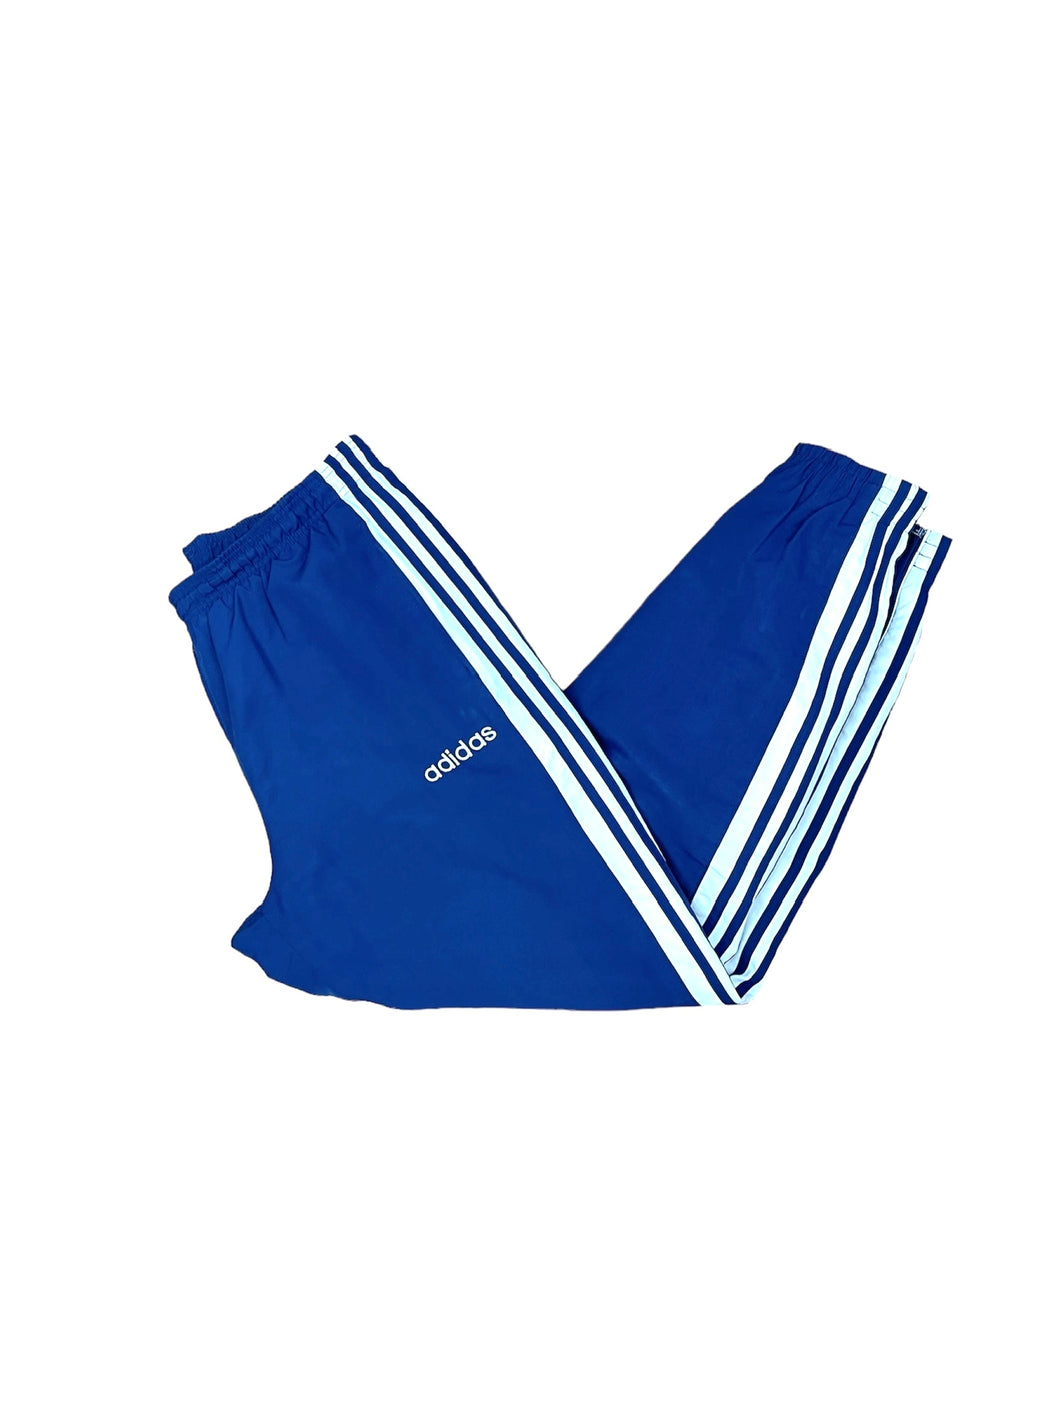 Adidas Baggy Track Pant - Large